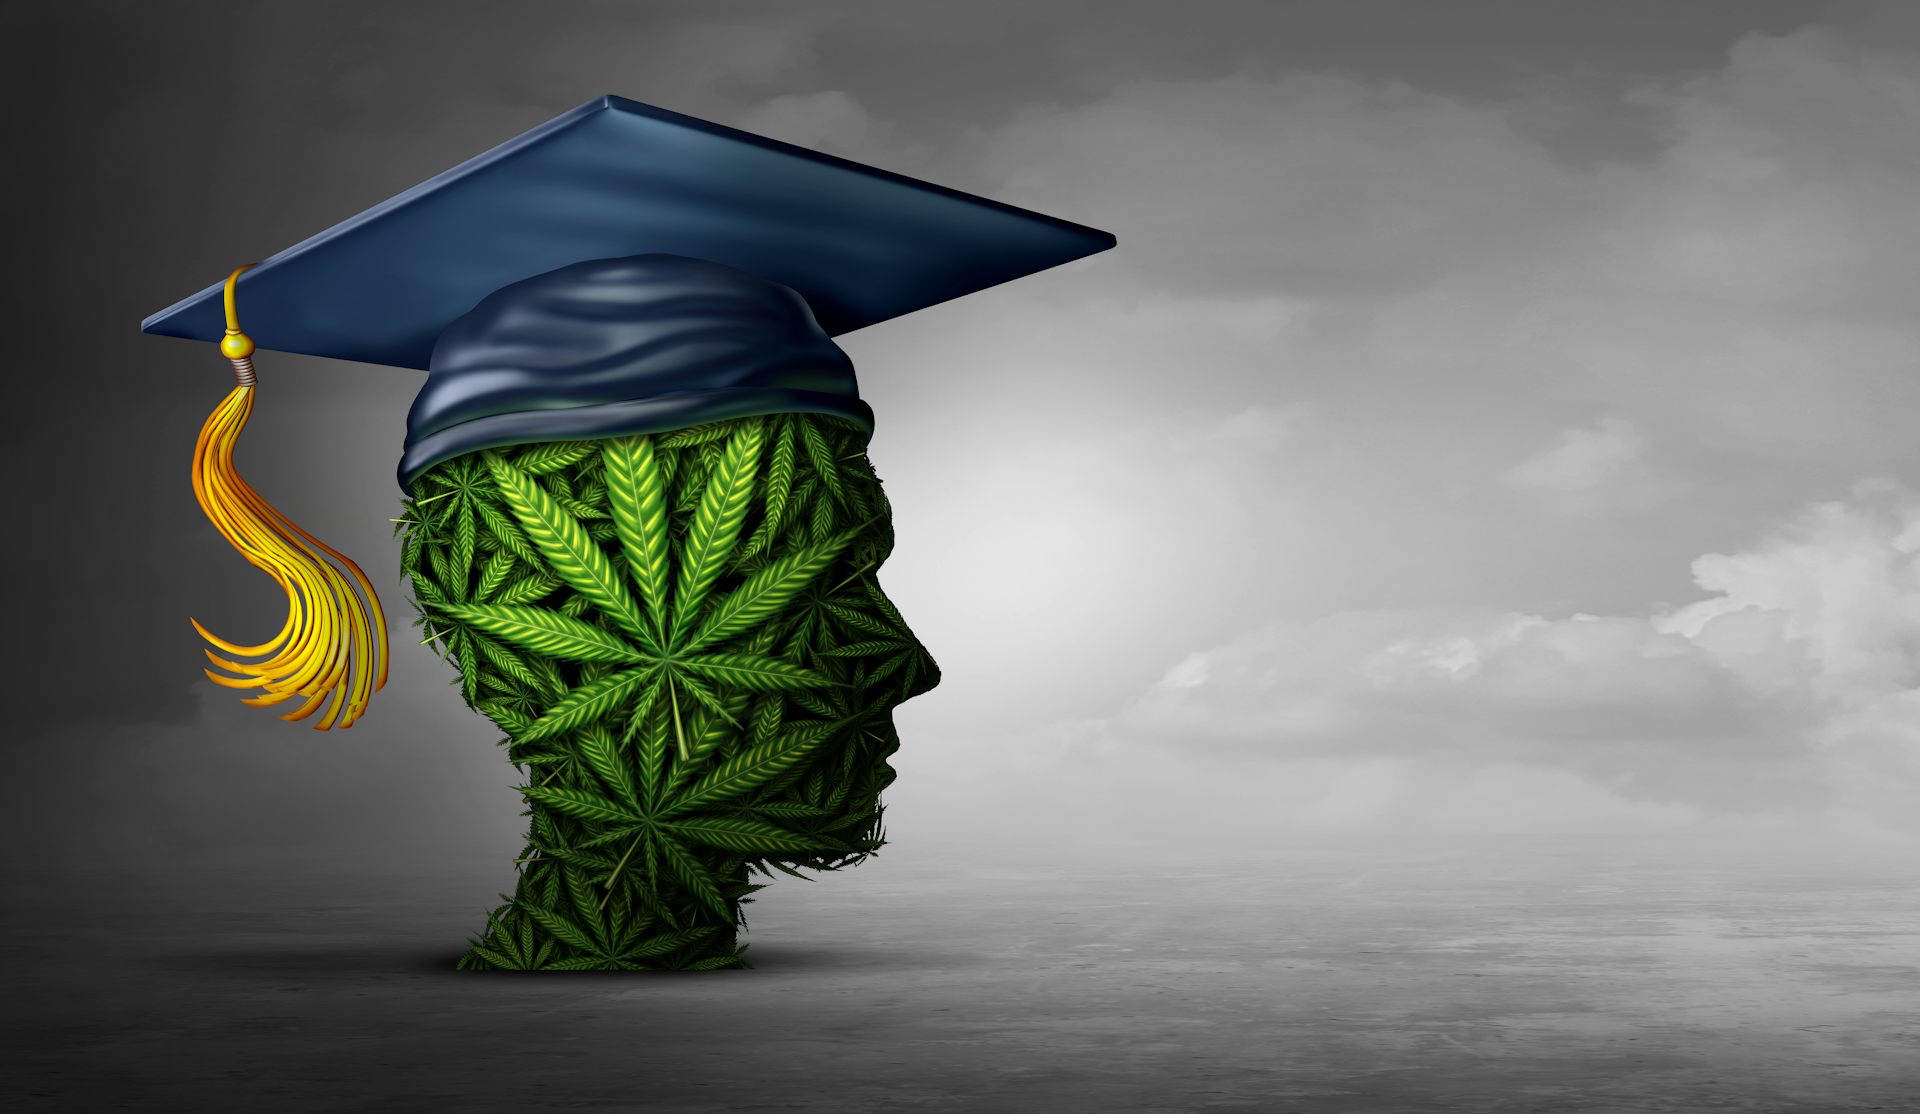 College Applications Rose in States That Legalized Recreational Marijuana